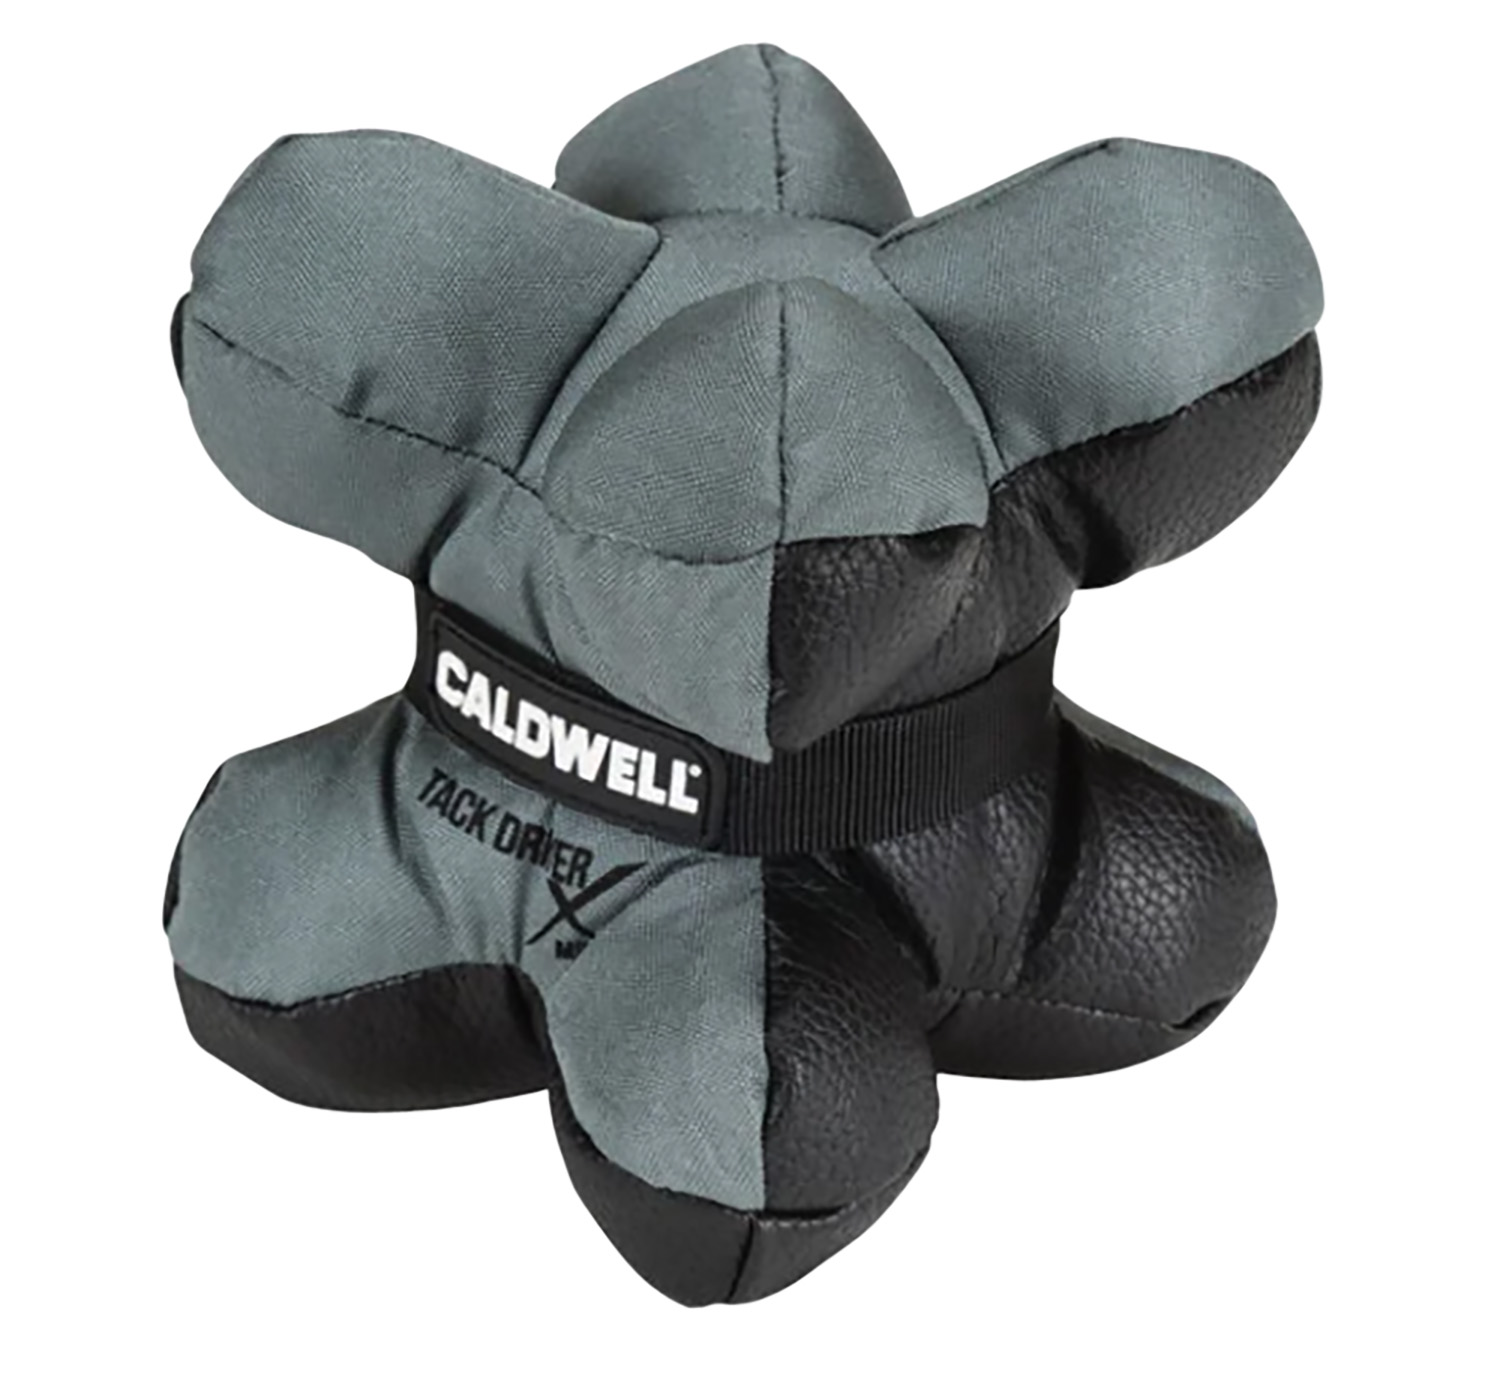 Caldwell 1102666 Tack Driver X Mini with Gray & Black Finish, Rubber Bottom, Plastic Pellet Filled, weighs 1.50 lbs & 5.50